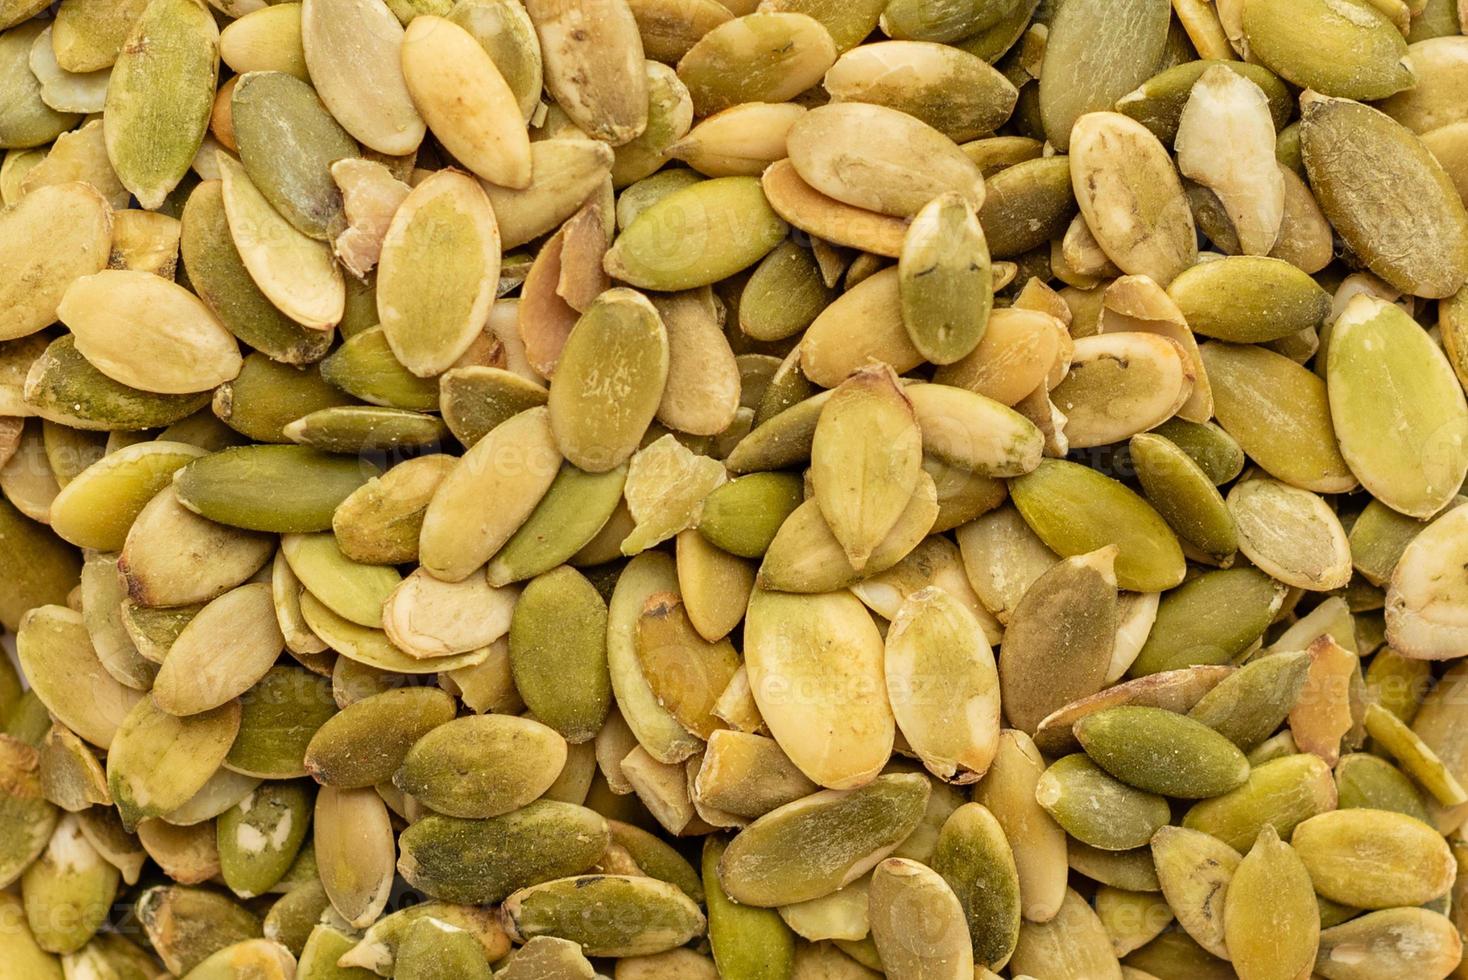 Pumpkin seeds close up. It can be used as a background photo